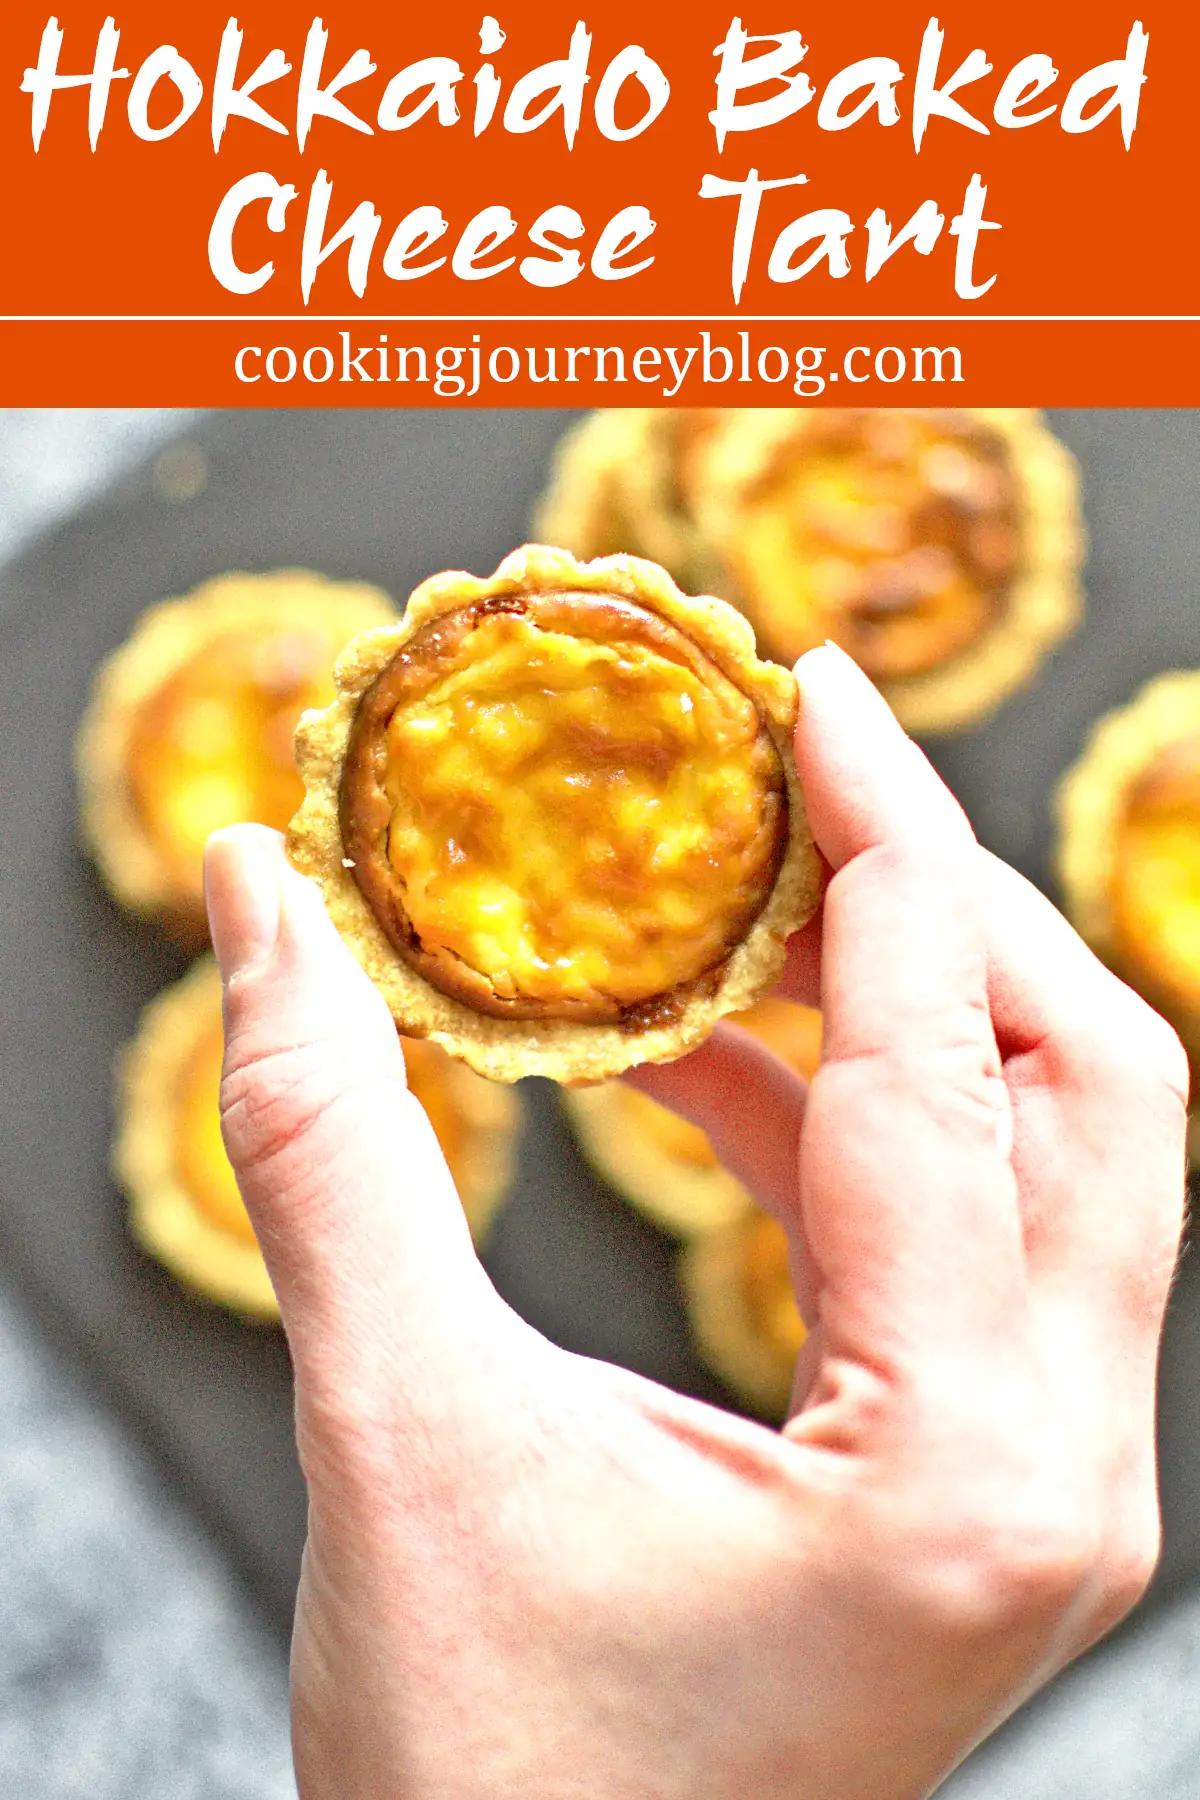 Hokkaido baked cheese tart is an easy and delicious appetizer that can be served as an entree. You can pair them with wine or a cup of tea. Sweet and savory tarts that have rich filling and crunchy pastry. Truly magnificent baking project!